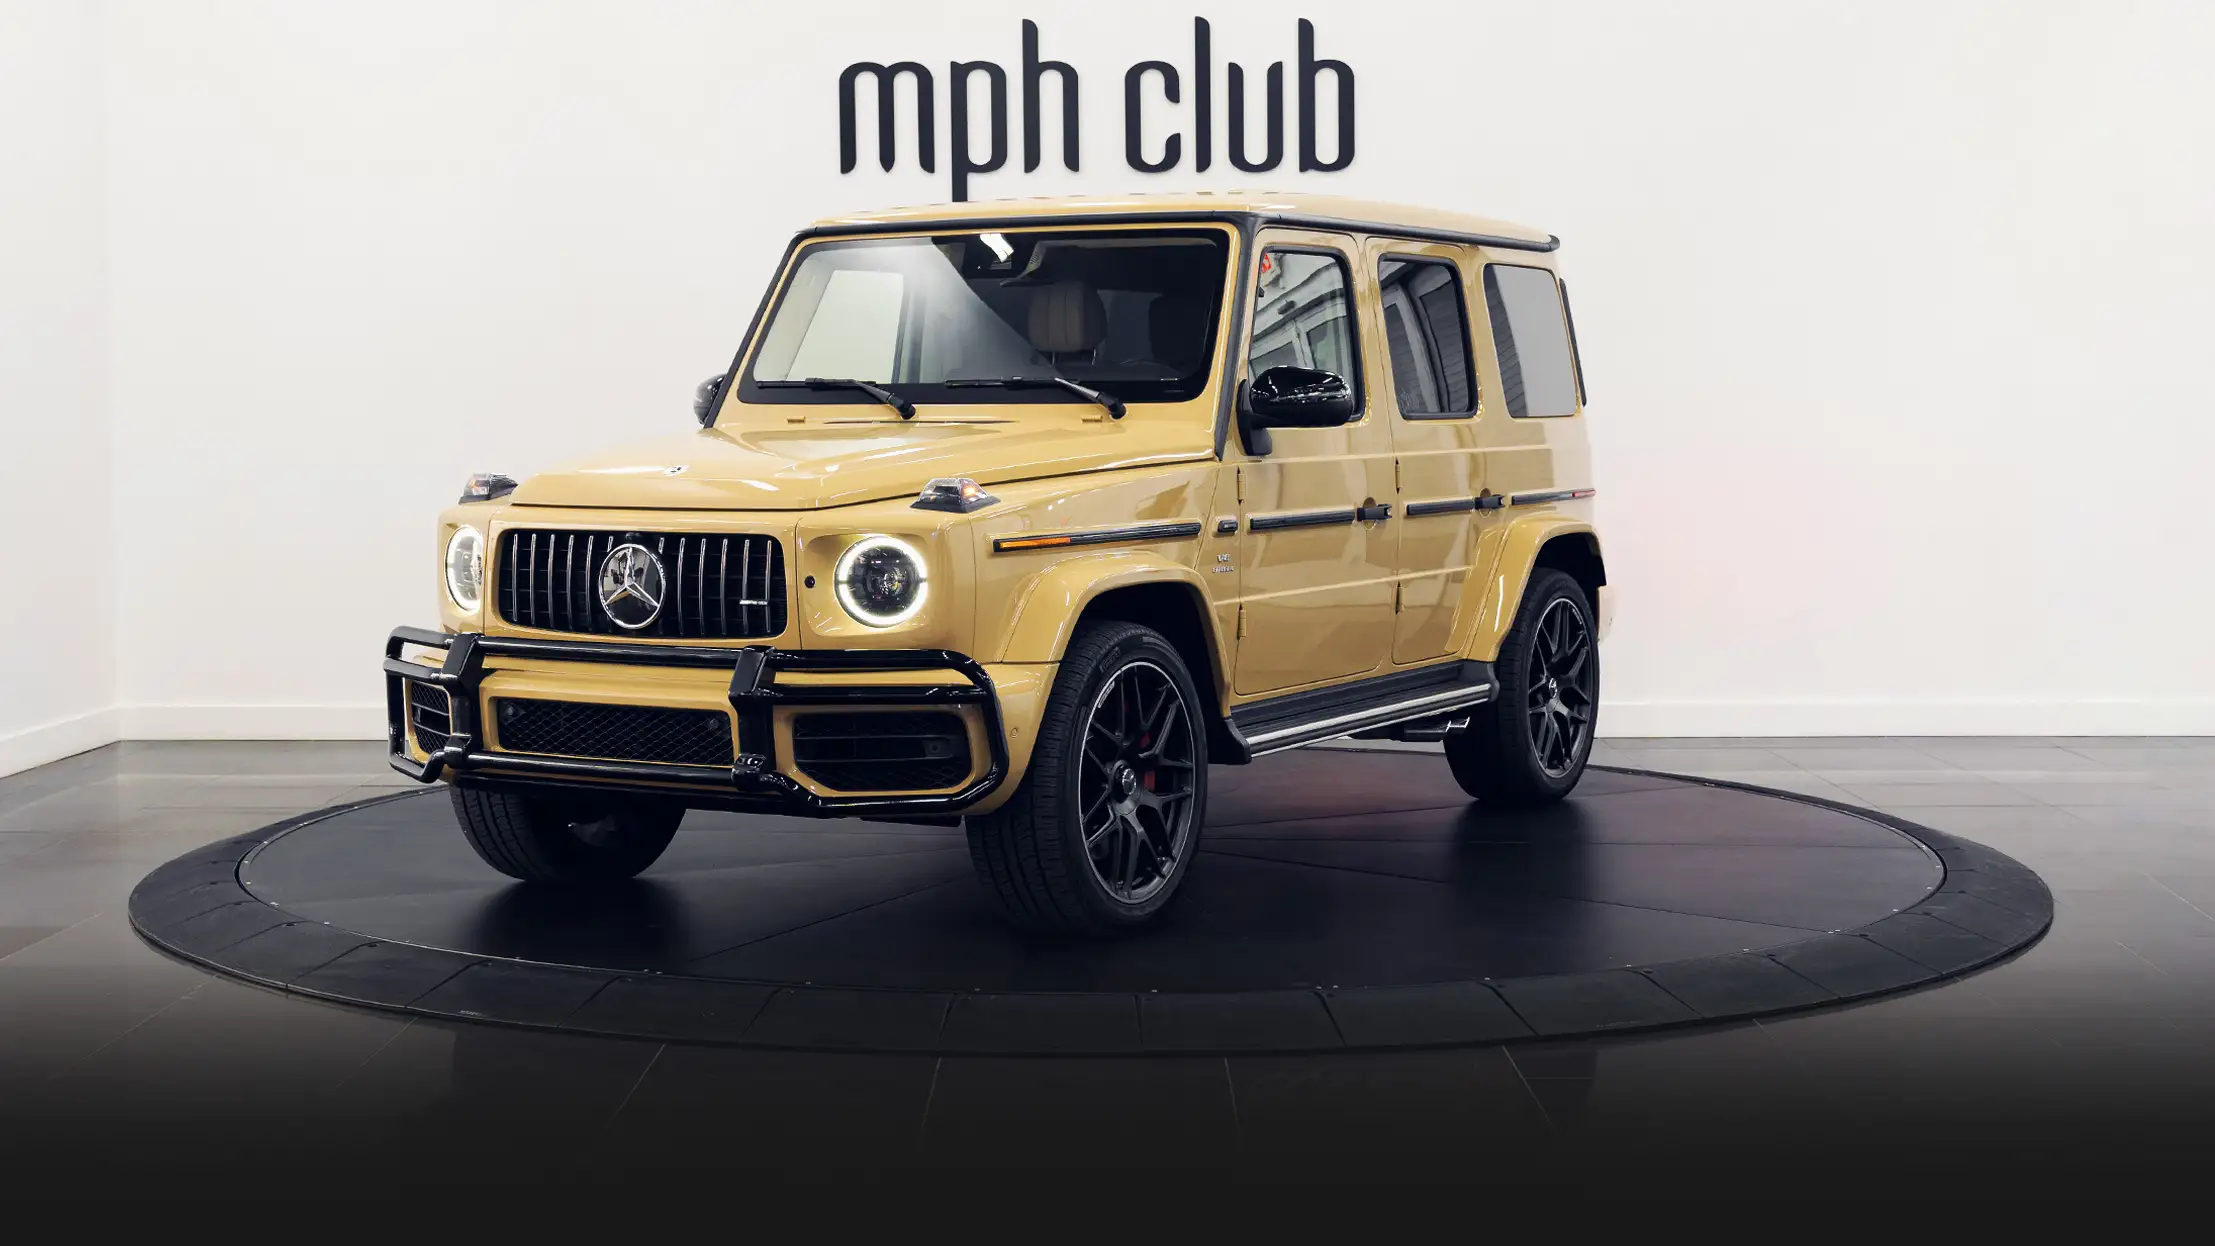 Sand with white interior Mercedes Benz G63 AMG G Wagon rental profile view turntable rszd mph club